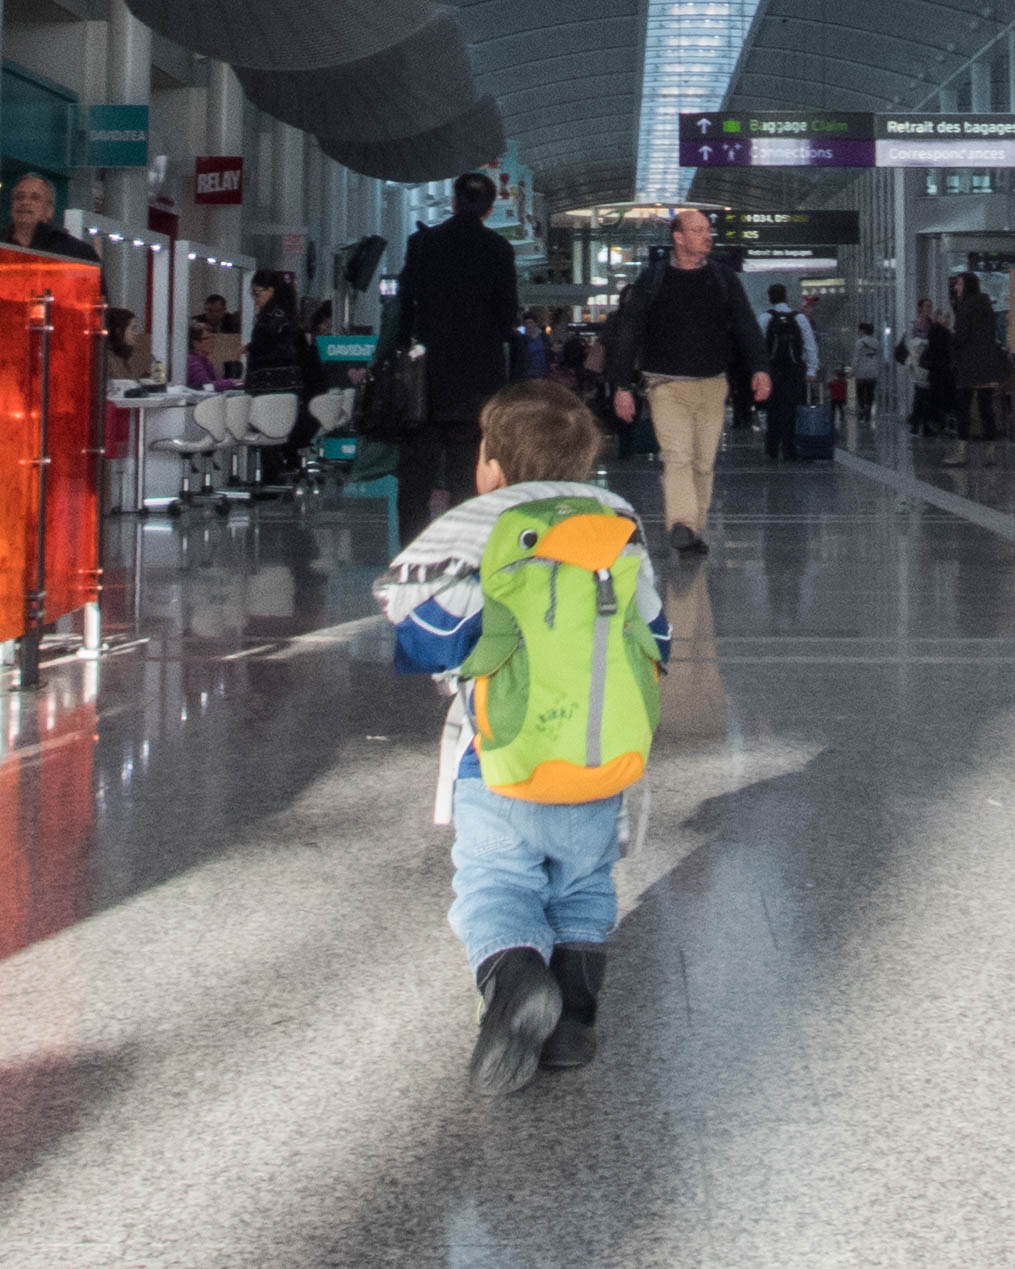 A toddler carrying a backpack walks through an airport